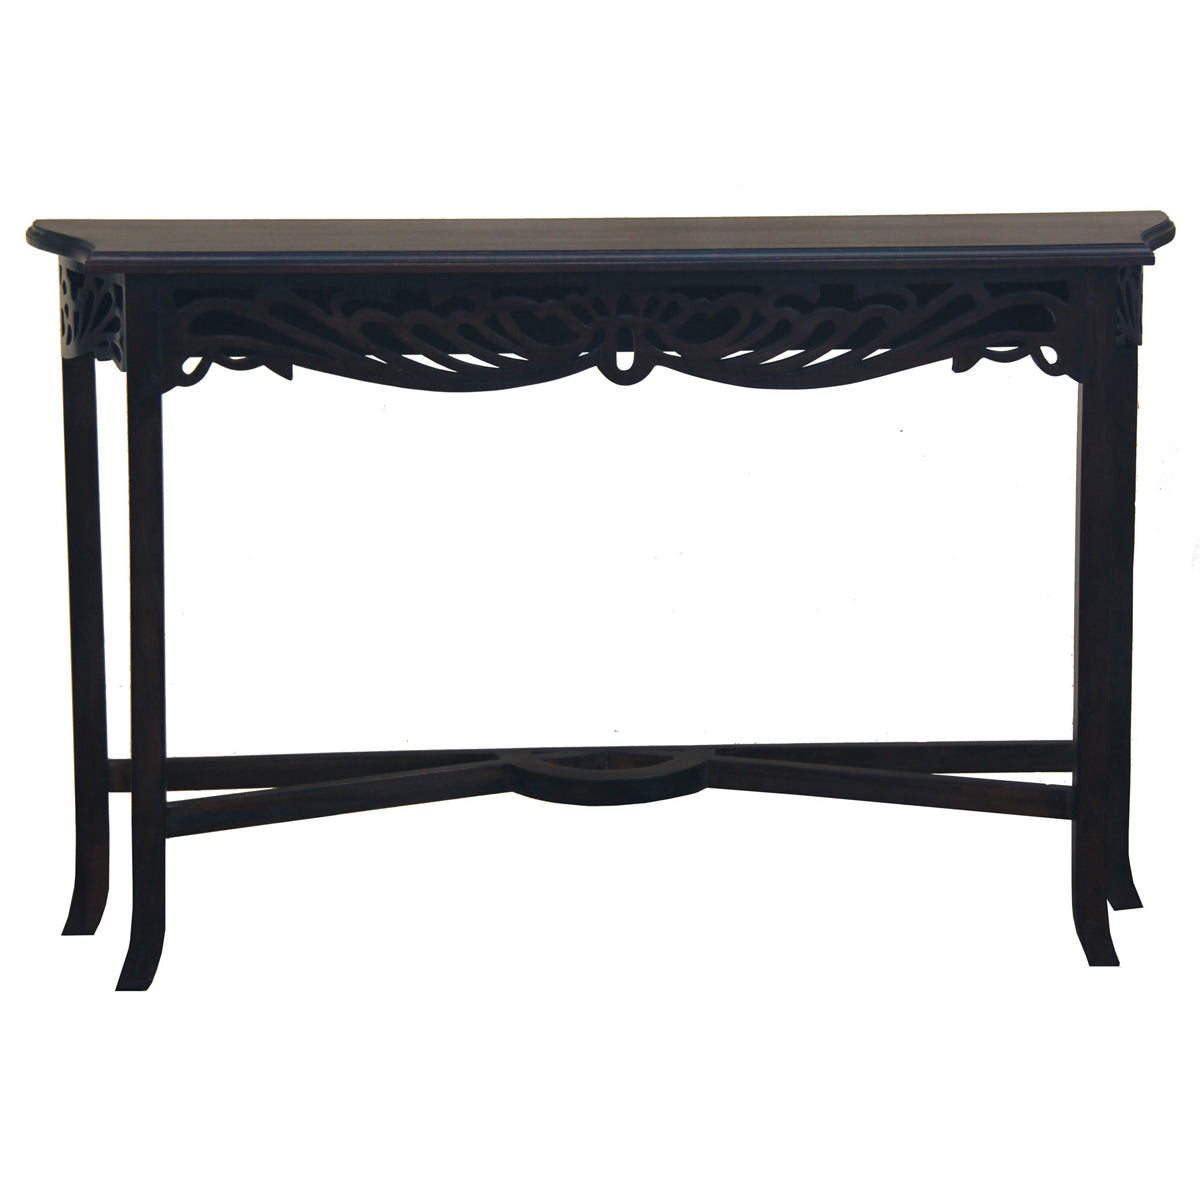 Jepara Handcarved Timber Console in Chocolate - 120cm - Notbrand